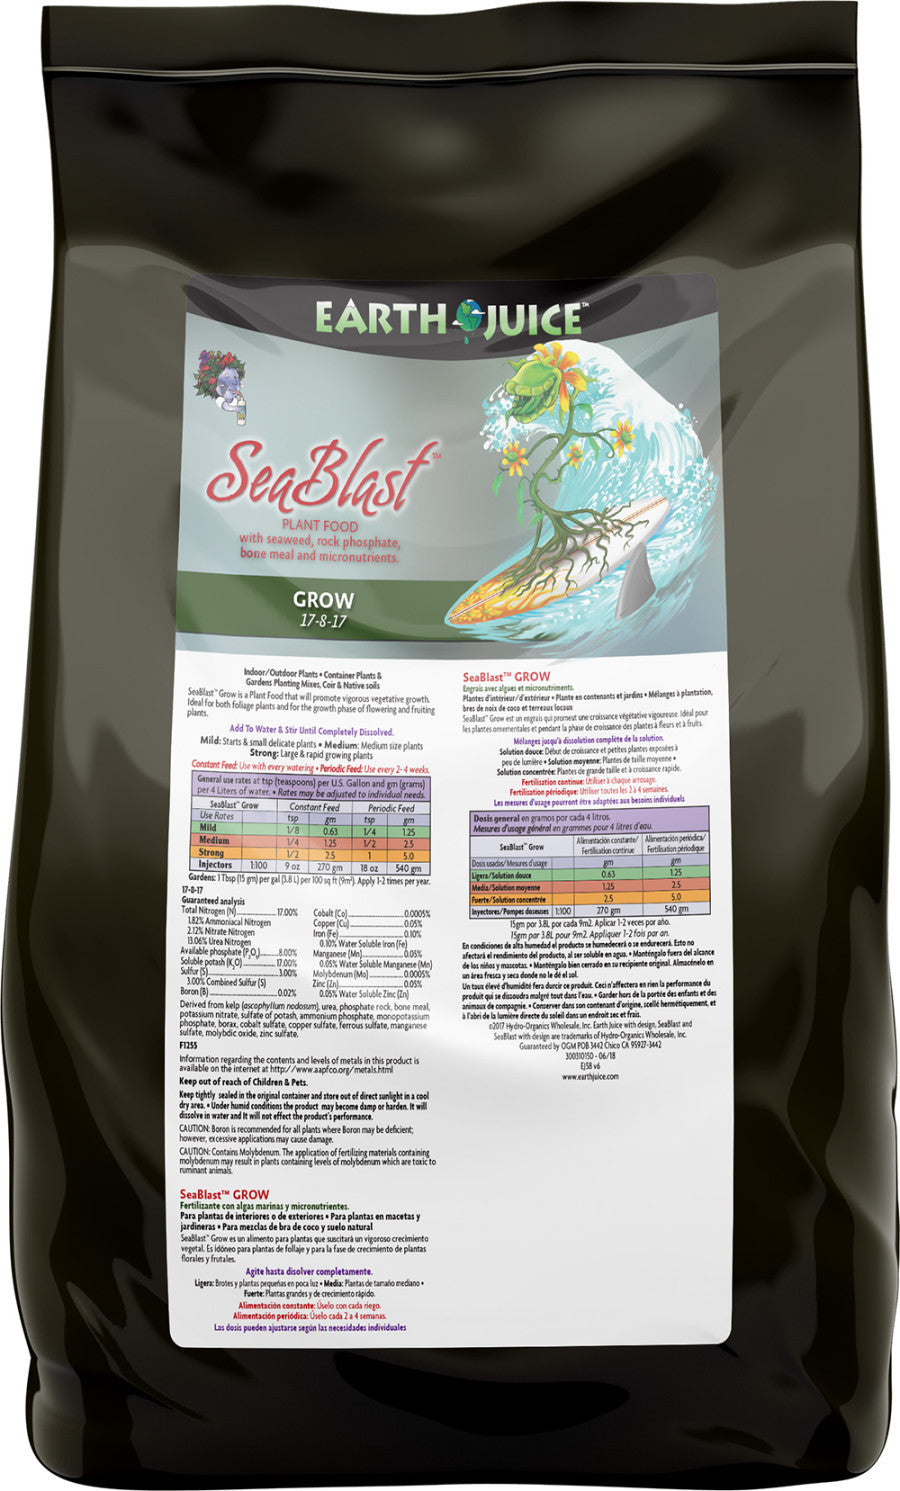 A black rectangular bag with a white nutritional label and above it is a rectangular image of an orange and green carnivorous plant surfing on a blue wave with it's roots exposed.